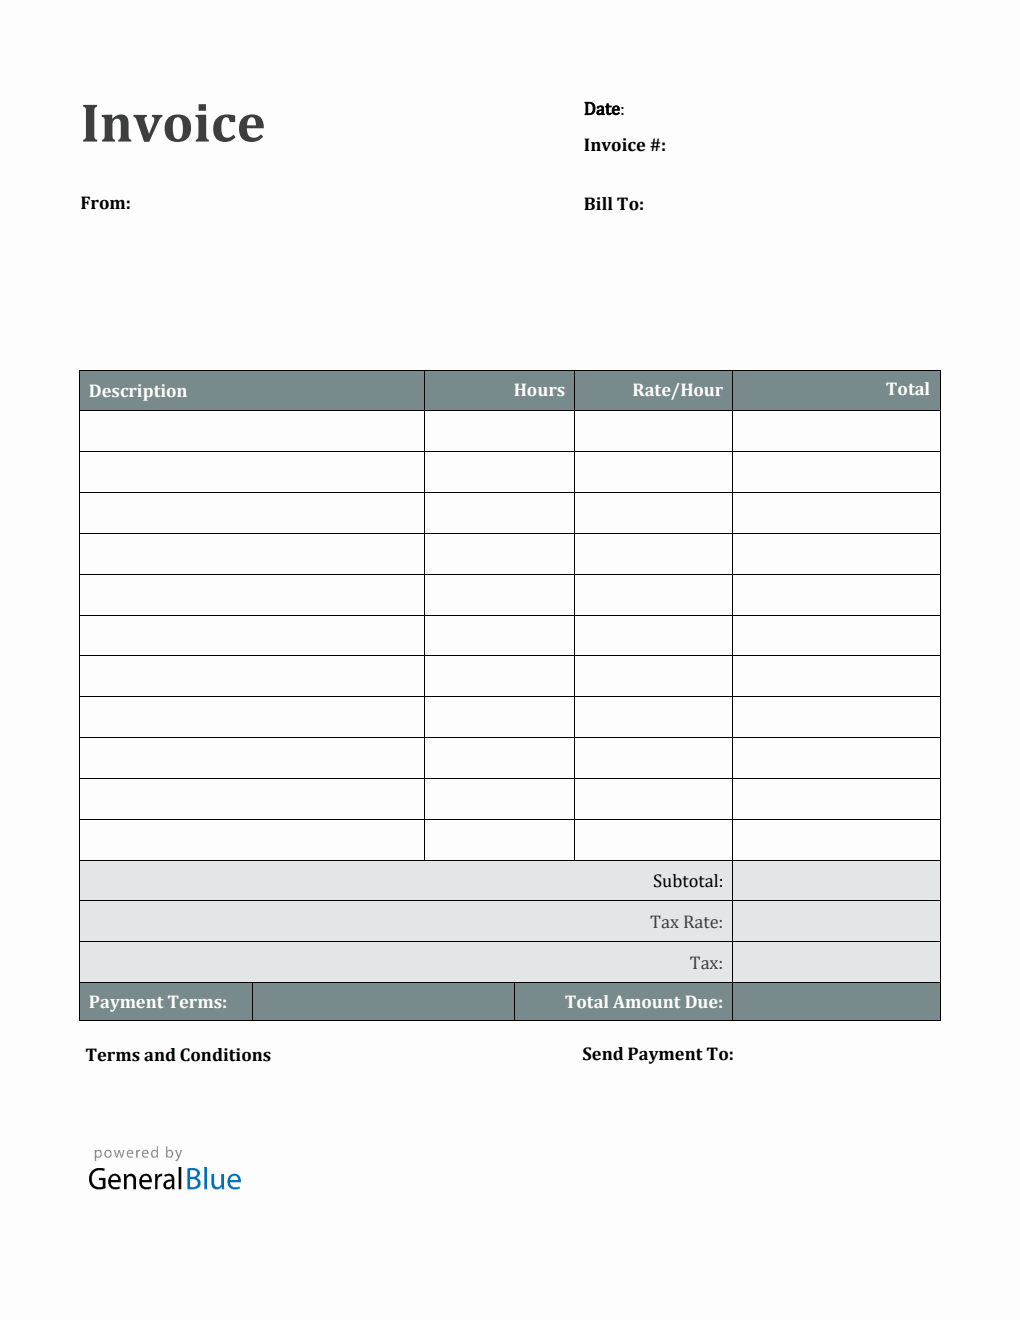 PDF Invoice Template for U.S. Freelancers With Tax calculation (Ion)